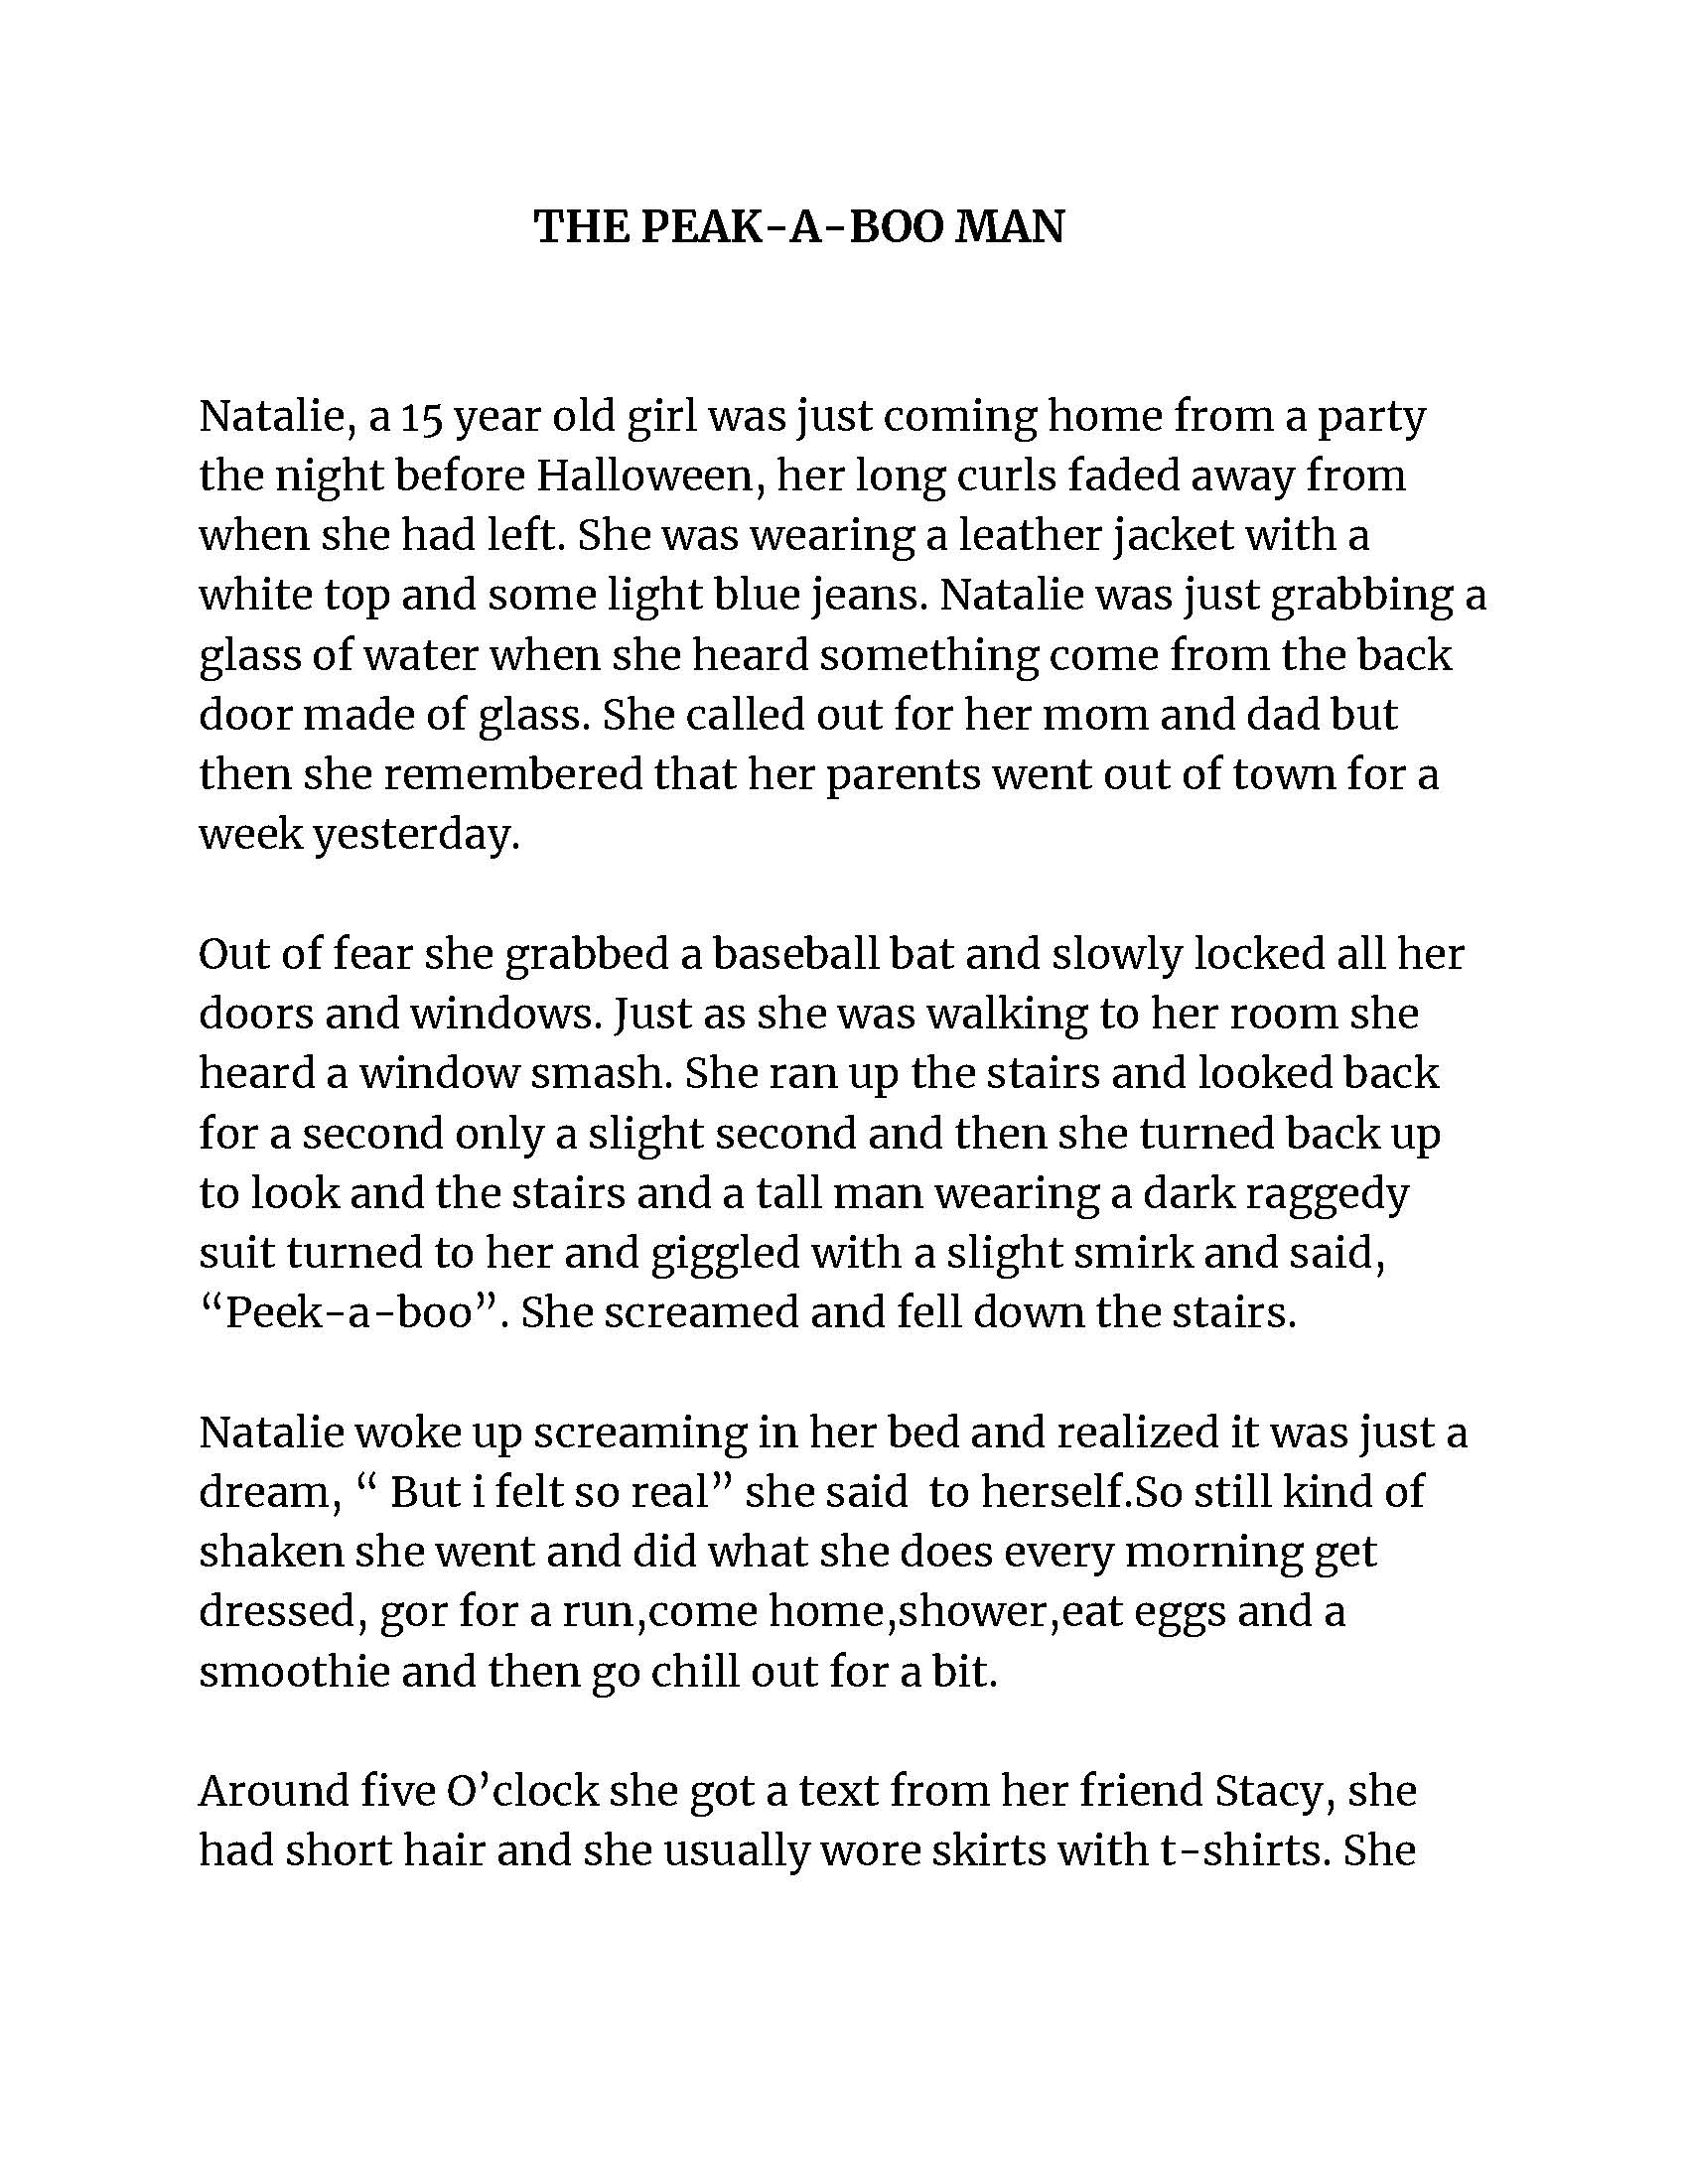 Teen Writing Contest 2021 Winner Page 1